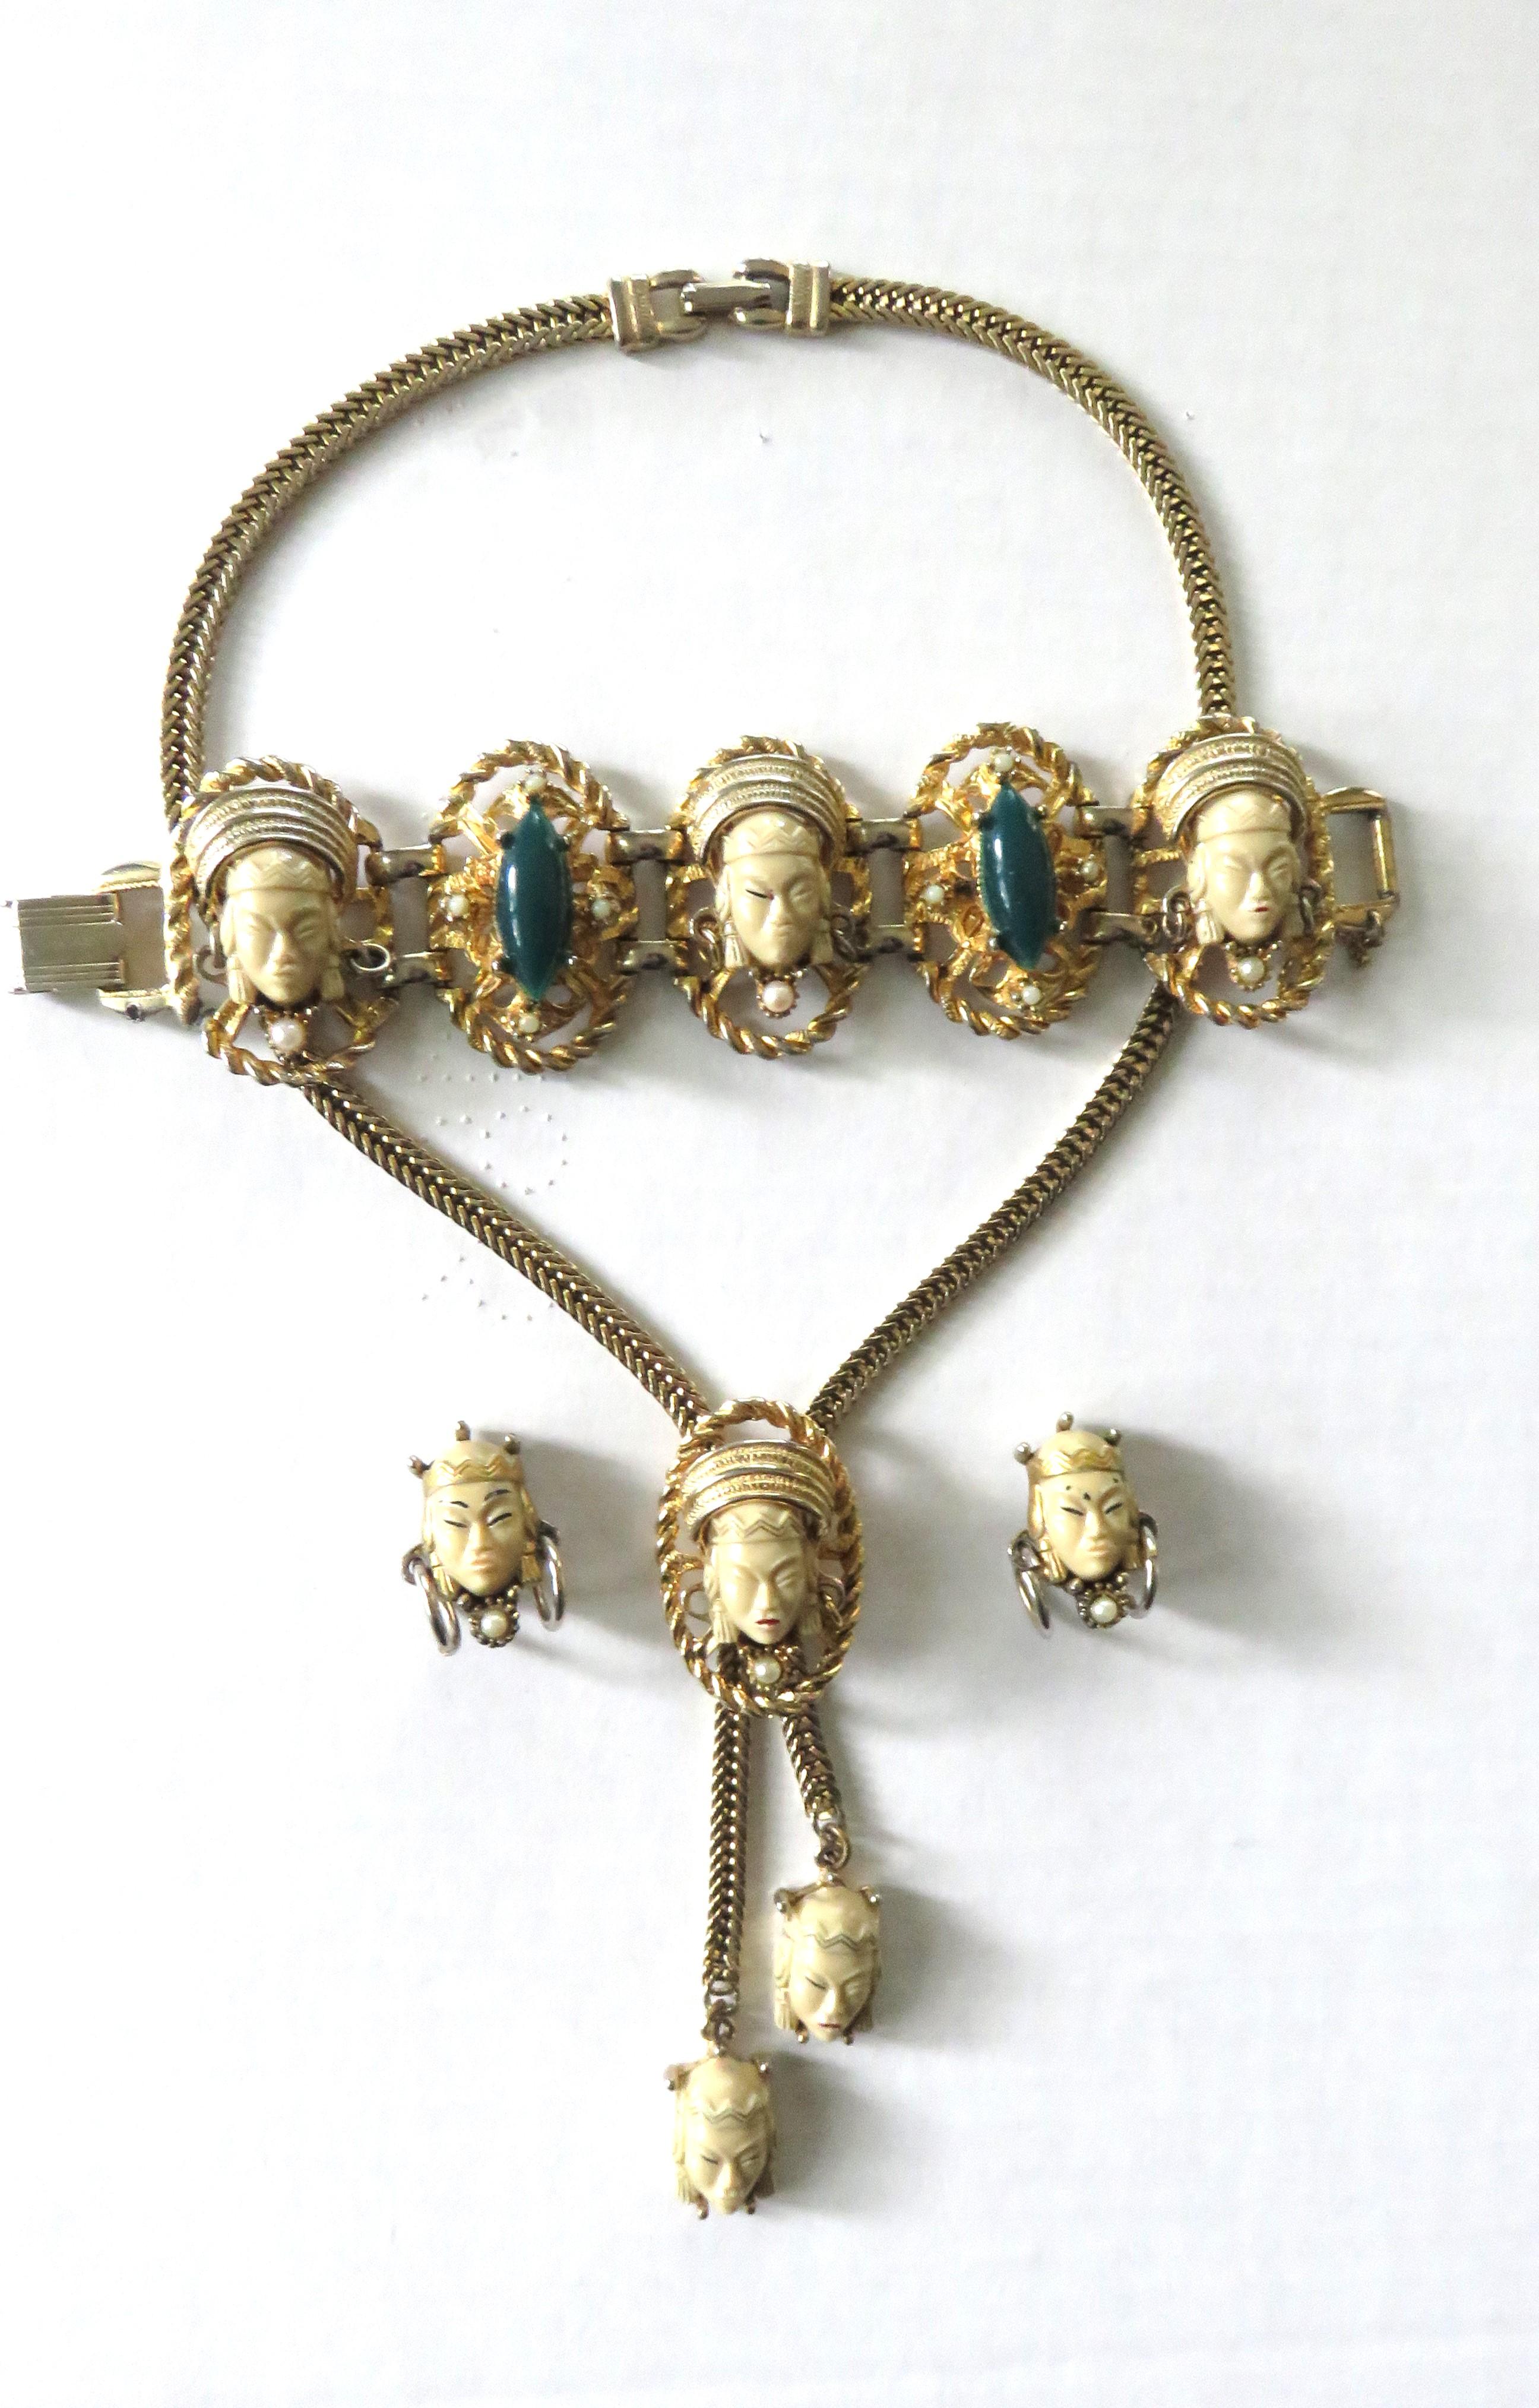 This is a fabulous 4 piece brass and lucite set from Selro Selini (unsigned) including a necklace, earrings and bracelet. It includes an adjustable bolo style necklace with a central face plus one on each end of the chain and a back fold over clasp